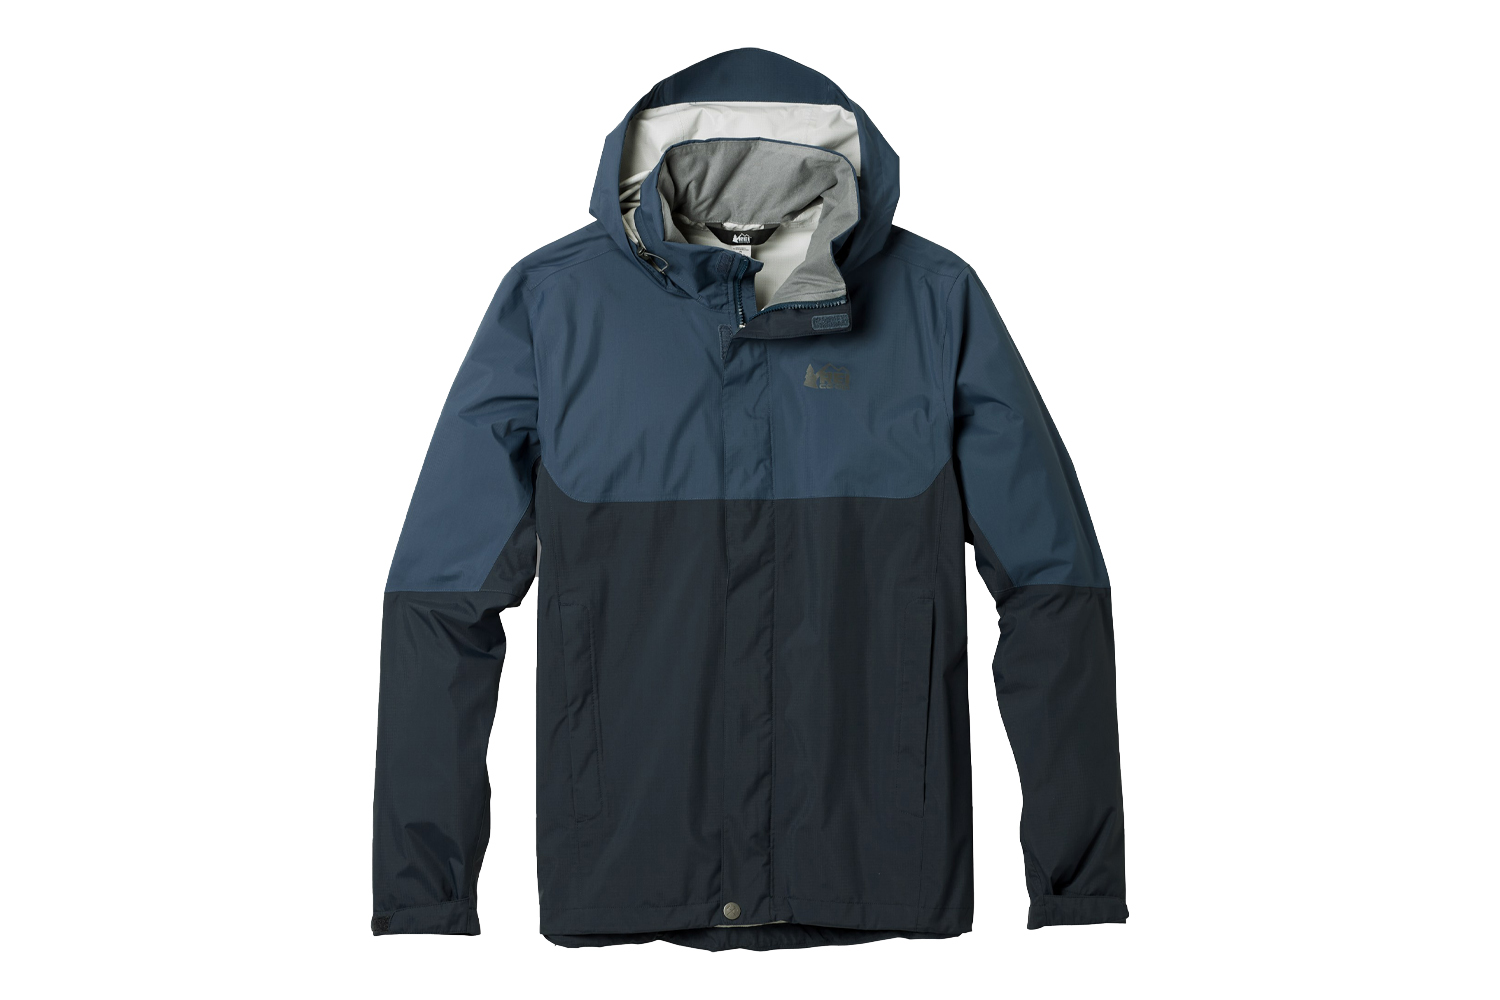 The REI Co-op Rainier Rain Jacket is the best budget rain jacket in 2022 for those looking for a rain jacket without spending a lot of money